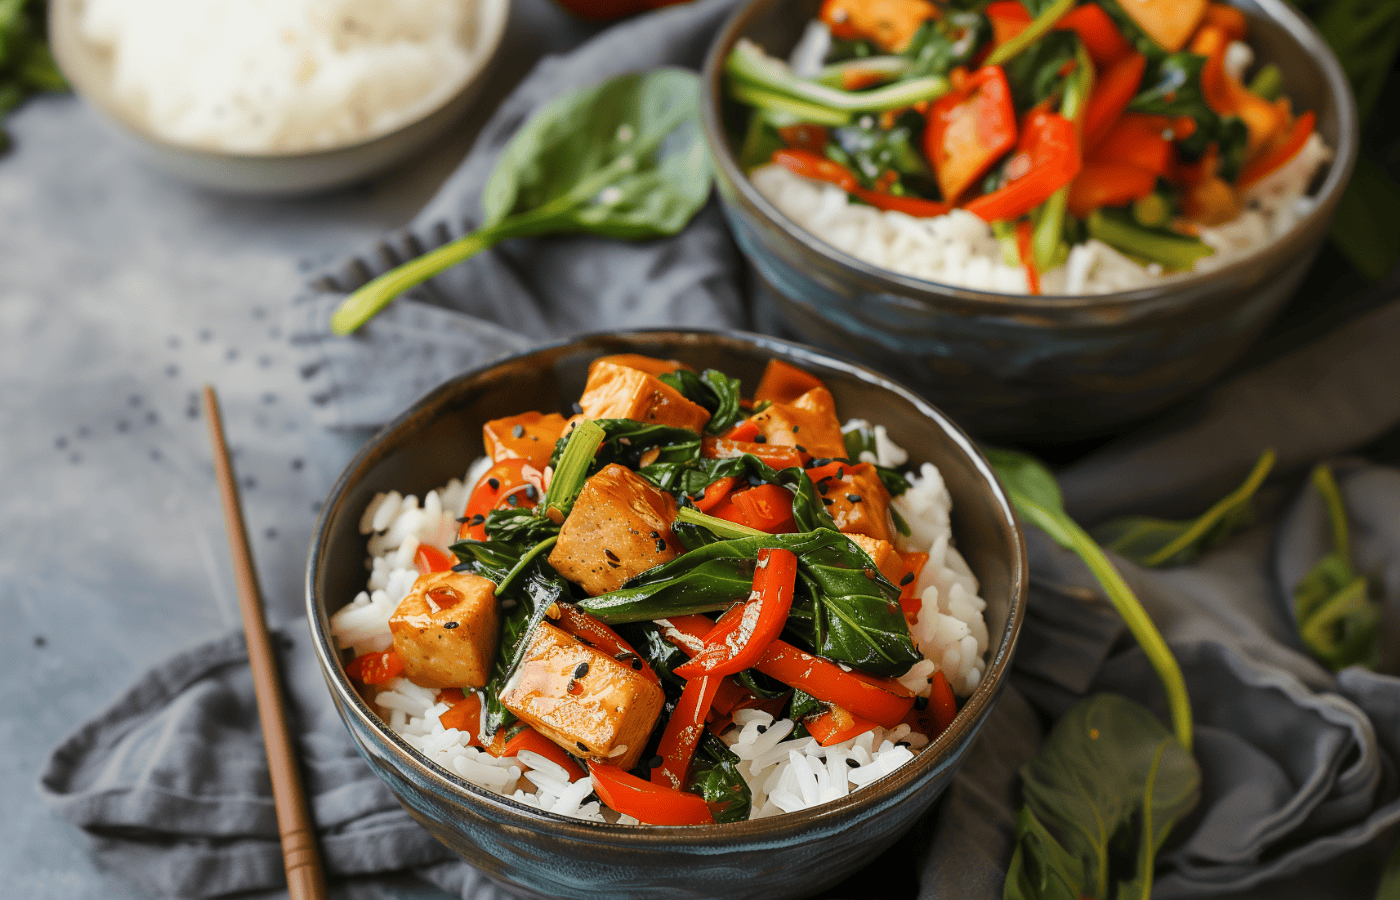 Vegan Tofu Ponzu Stir-Fry with Red Peppers and Bok Choy